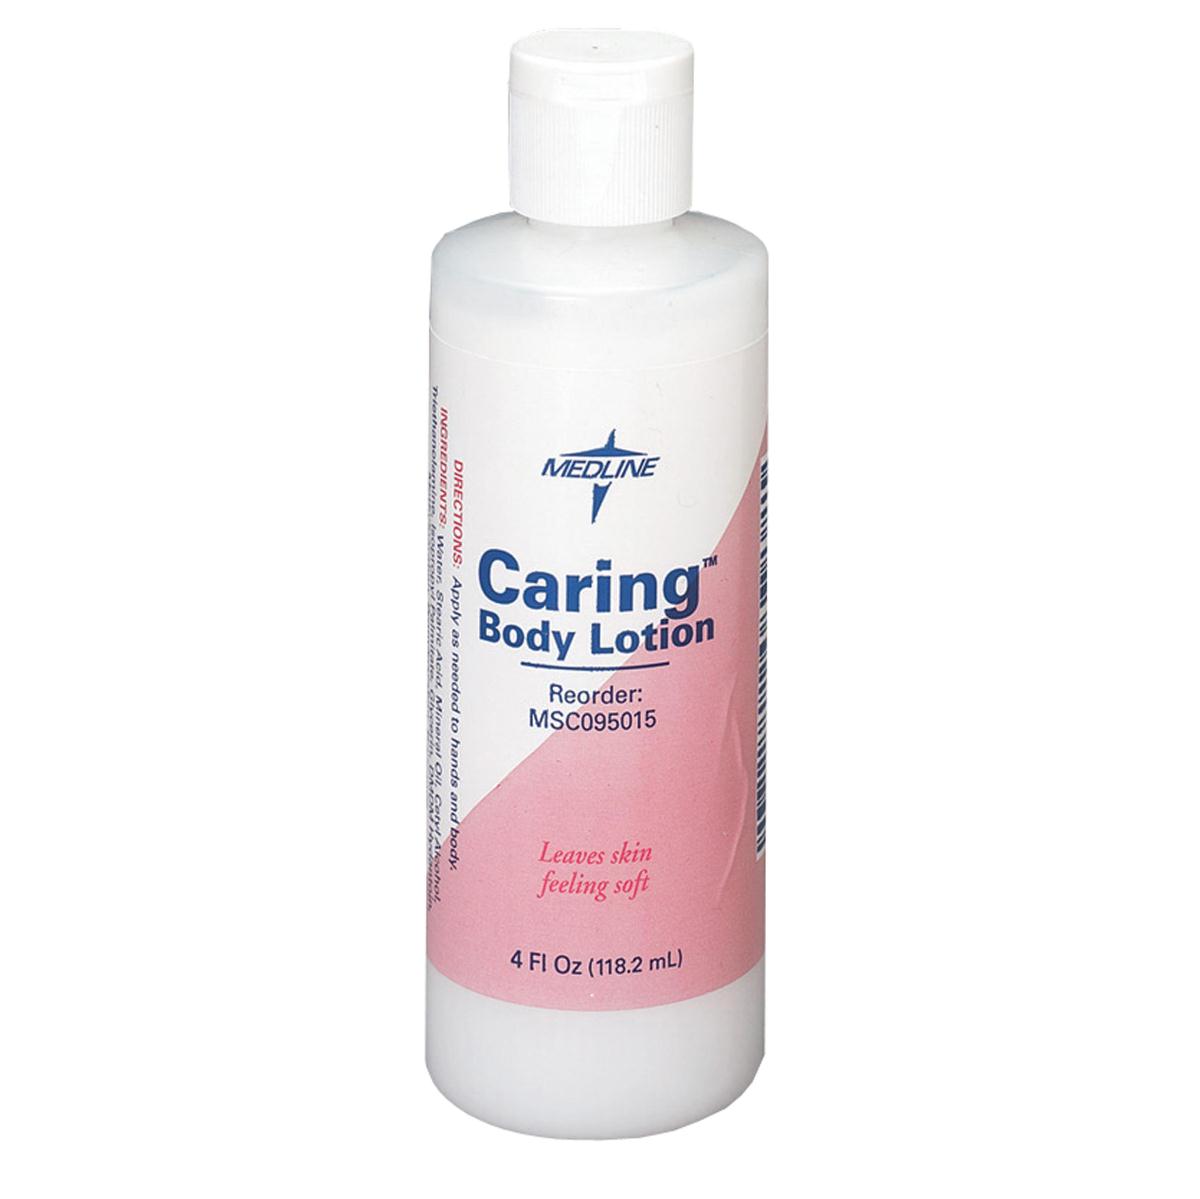 Caring Body Lotion,White,4.000 OZ Case of 60